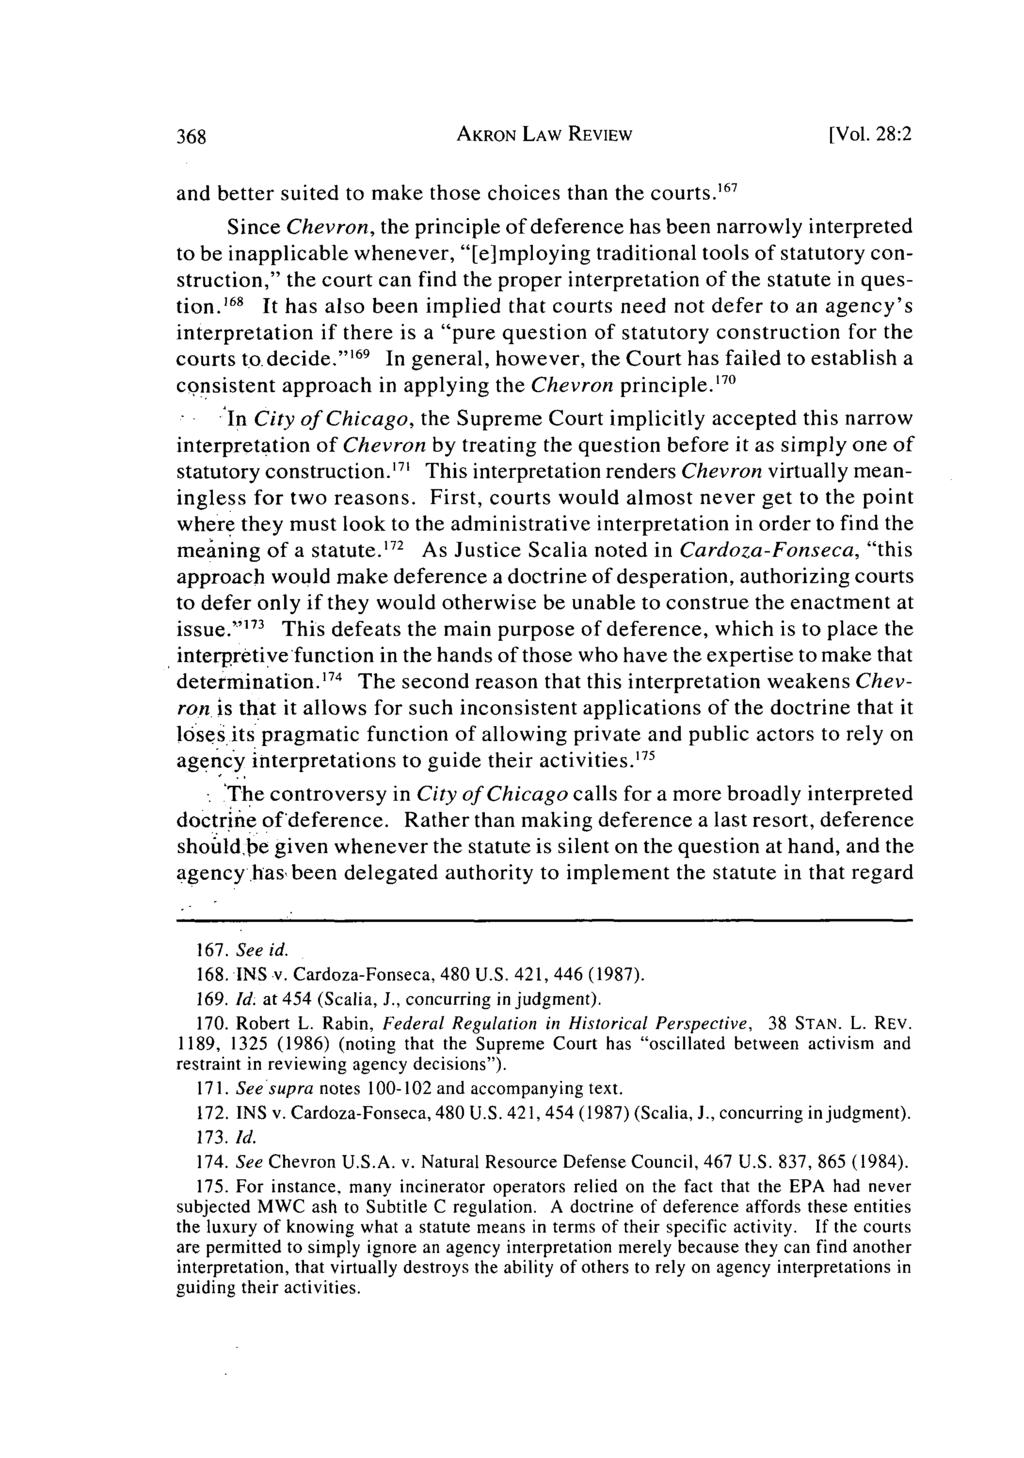 Akron Law Review, Vol. 28 [1995], Iss. 2, Art. 8 AKRON LAW REVIEW [Vol. 28:2 and better suited to make those choices than the courts.